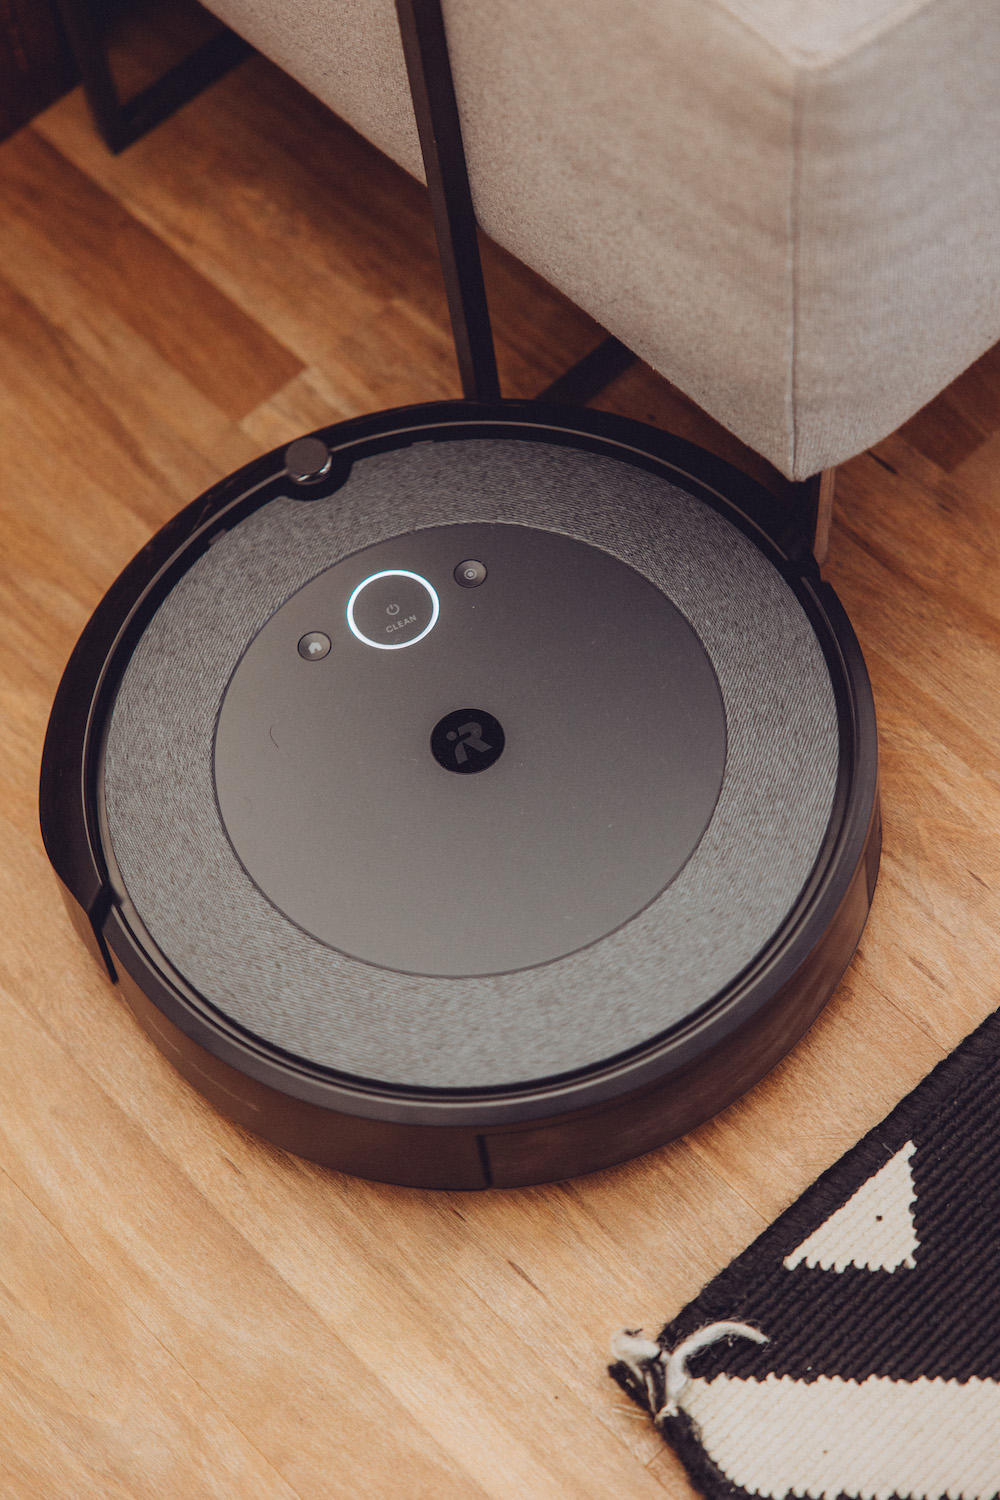 Roomba Robot Vacuum Review - keep it simpElle